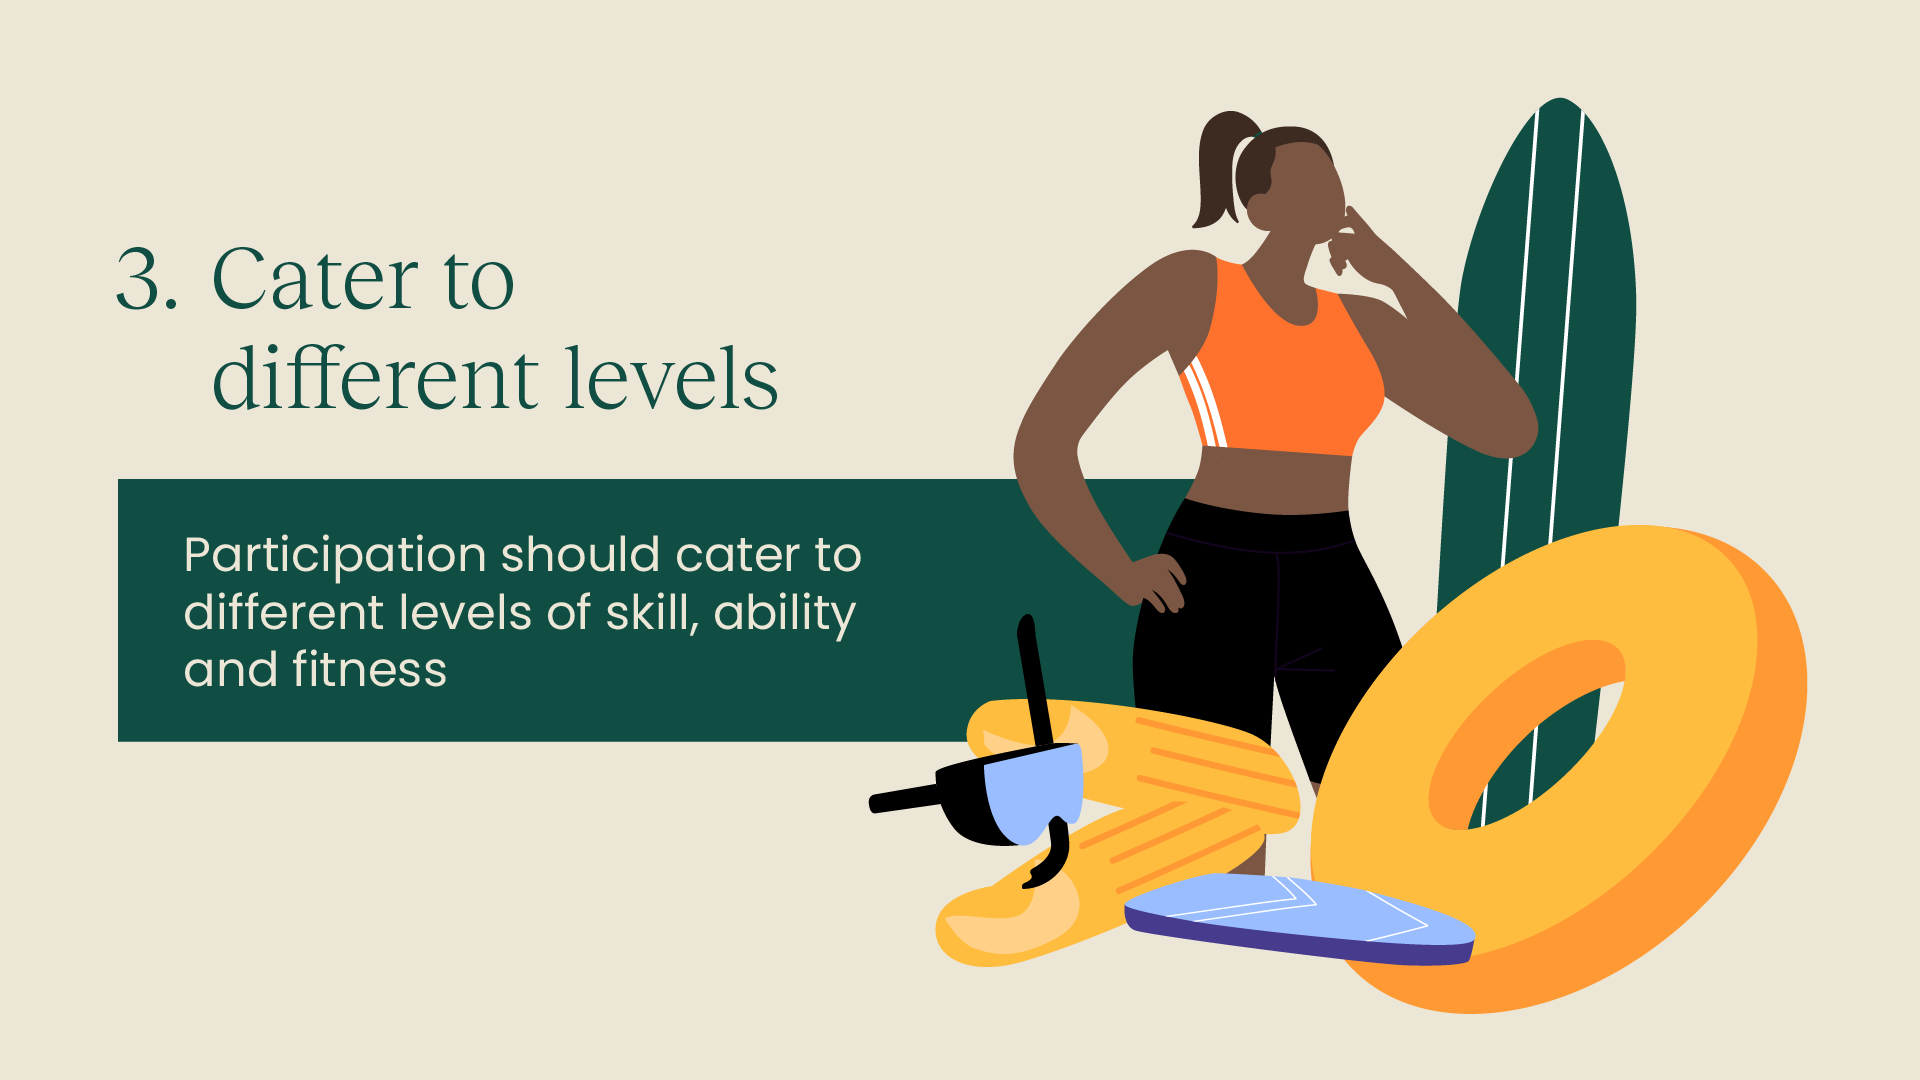 3 - Cater to different levels - Participation should cater to different levels of skill, ability and fitness